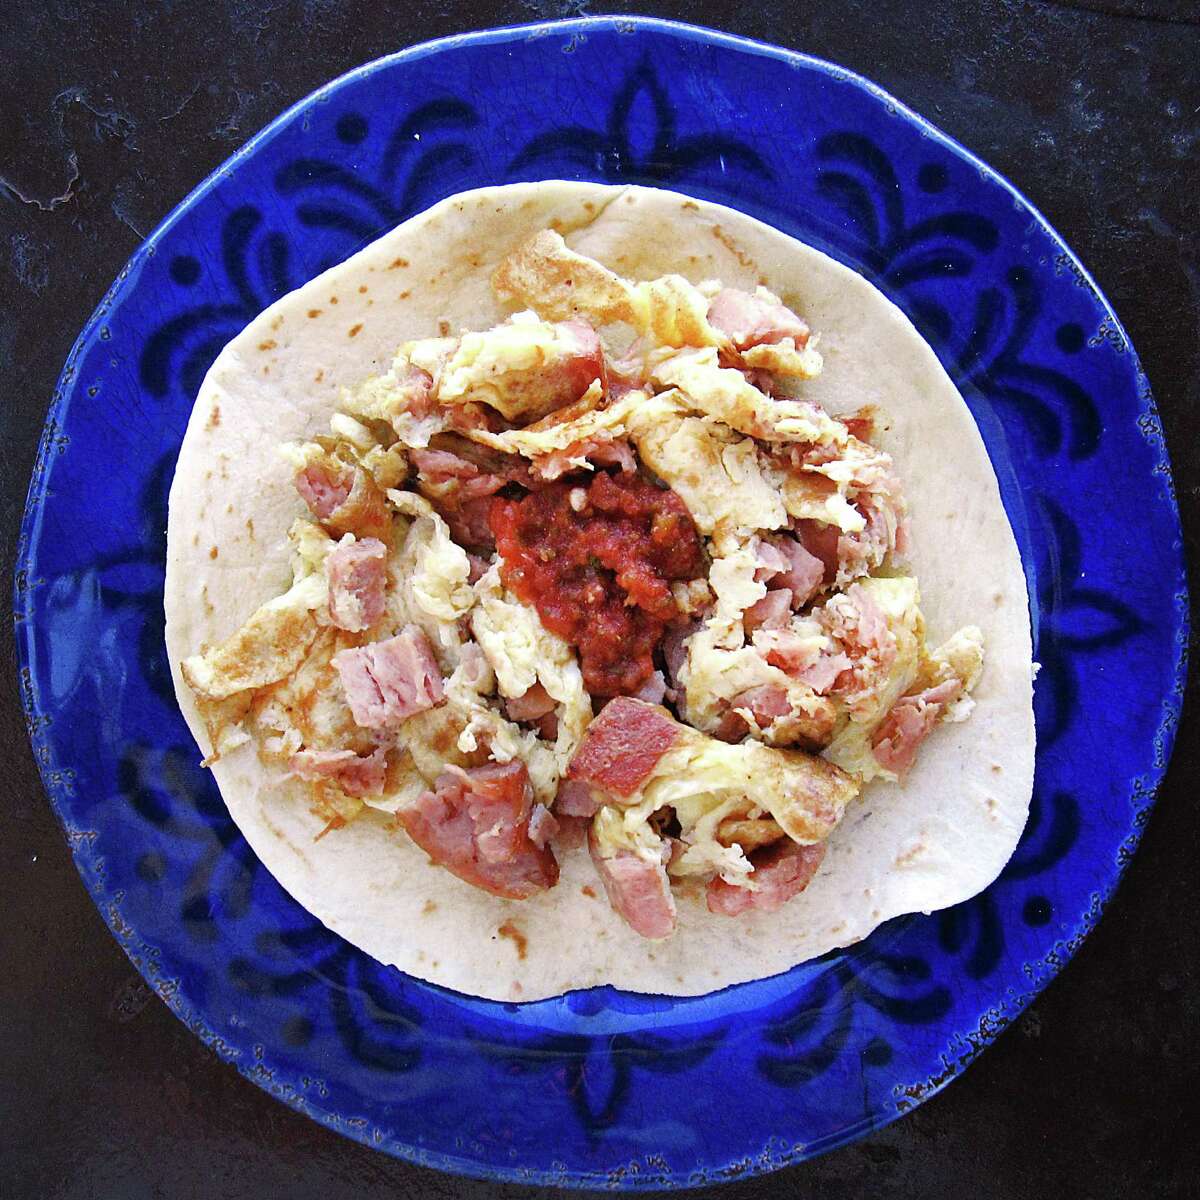 Spam and eggs taco on a handmade flour tortilla from Dos Jalisco Mexican Restaurant.